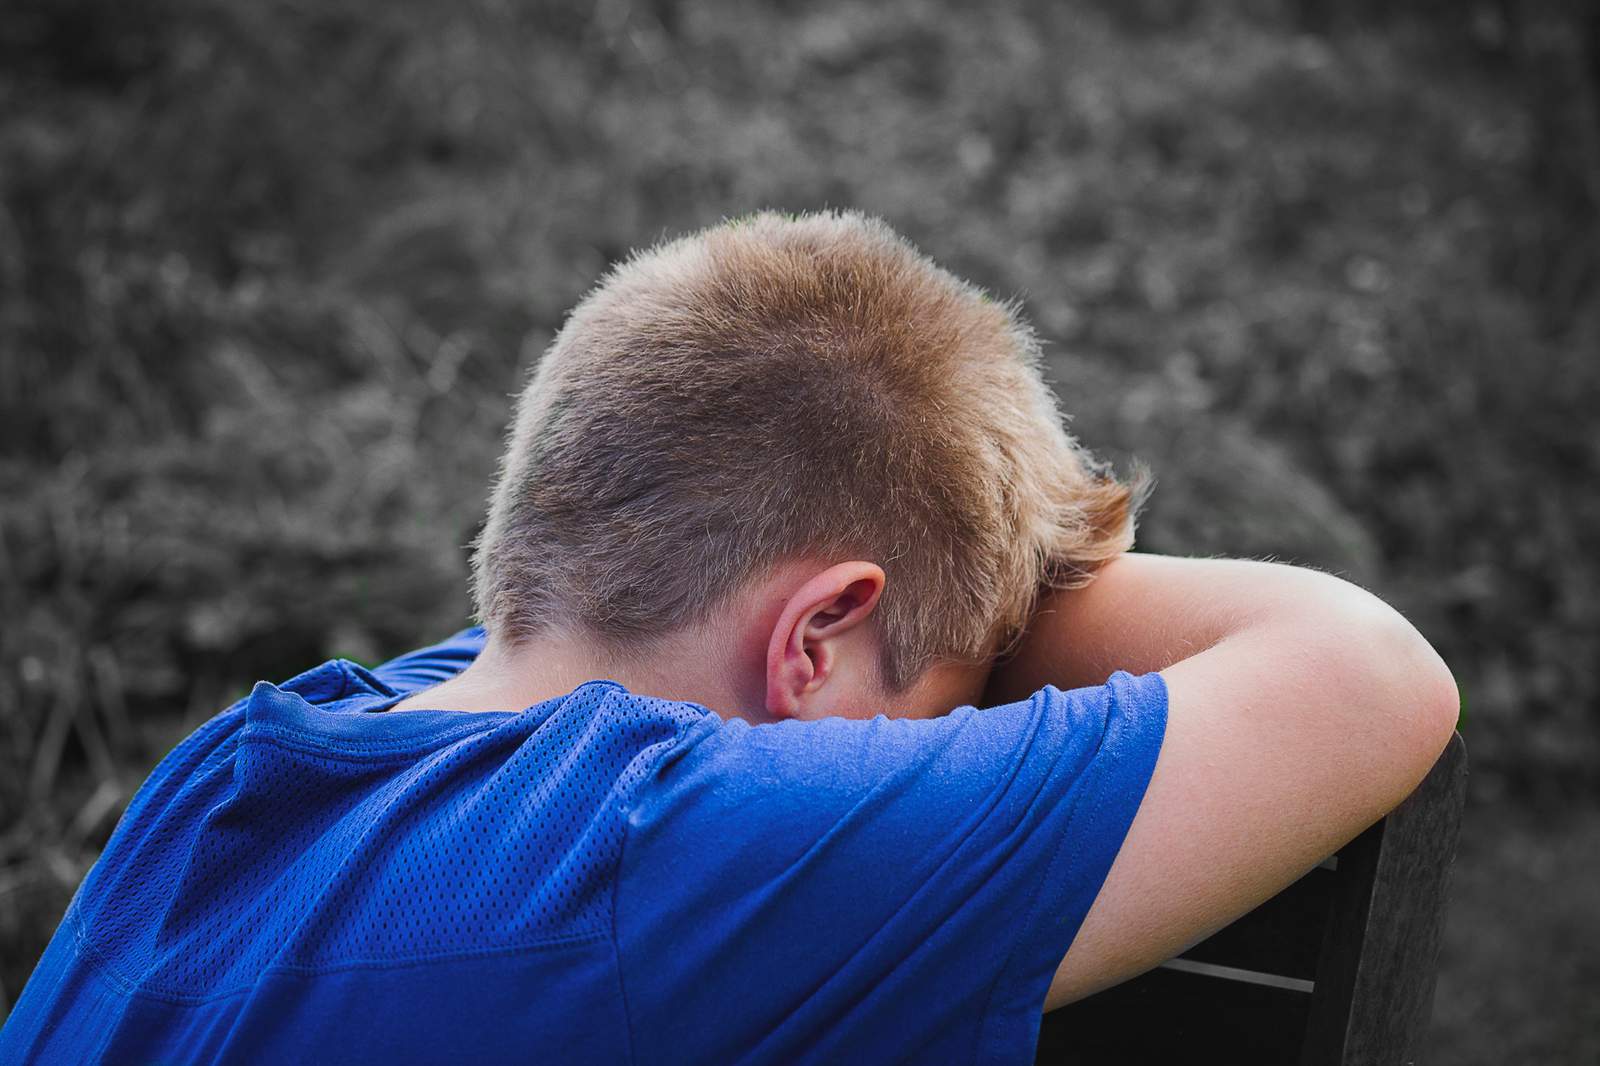 National Child Abuse Prevention Month: 5 warning signs to look out for